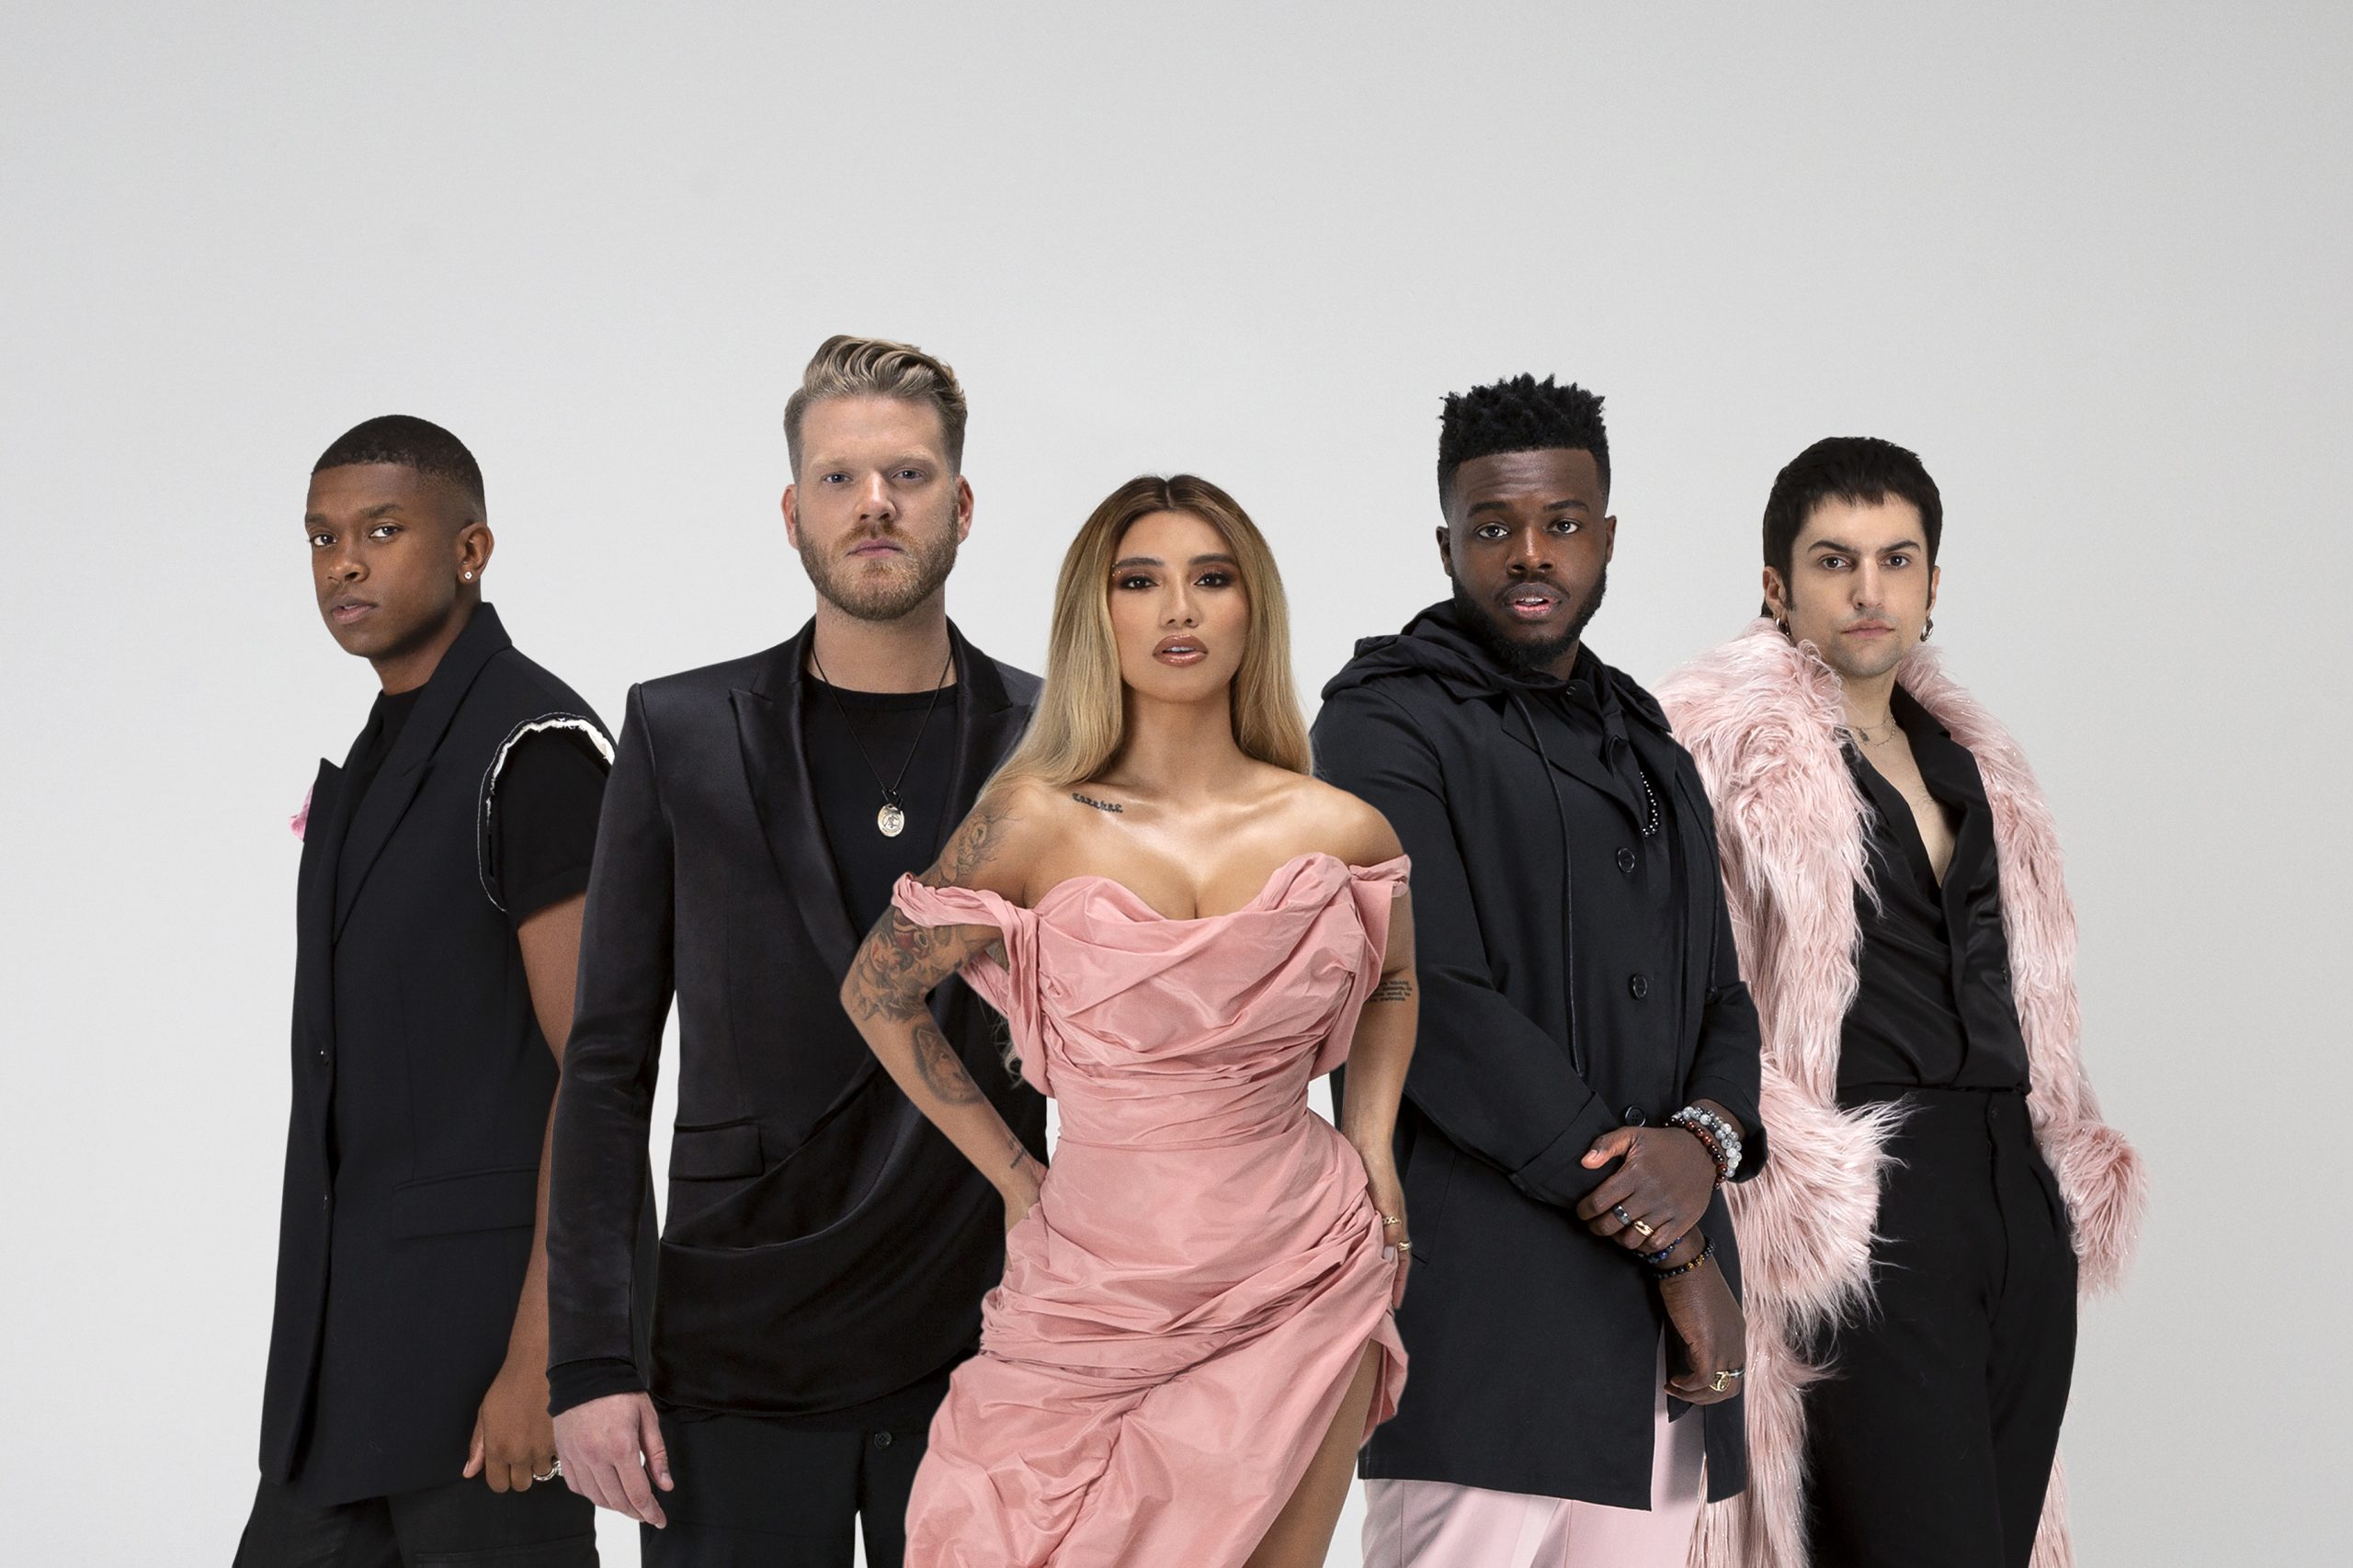 Pentatonix stands in front of an all-white backdrop